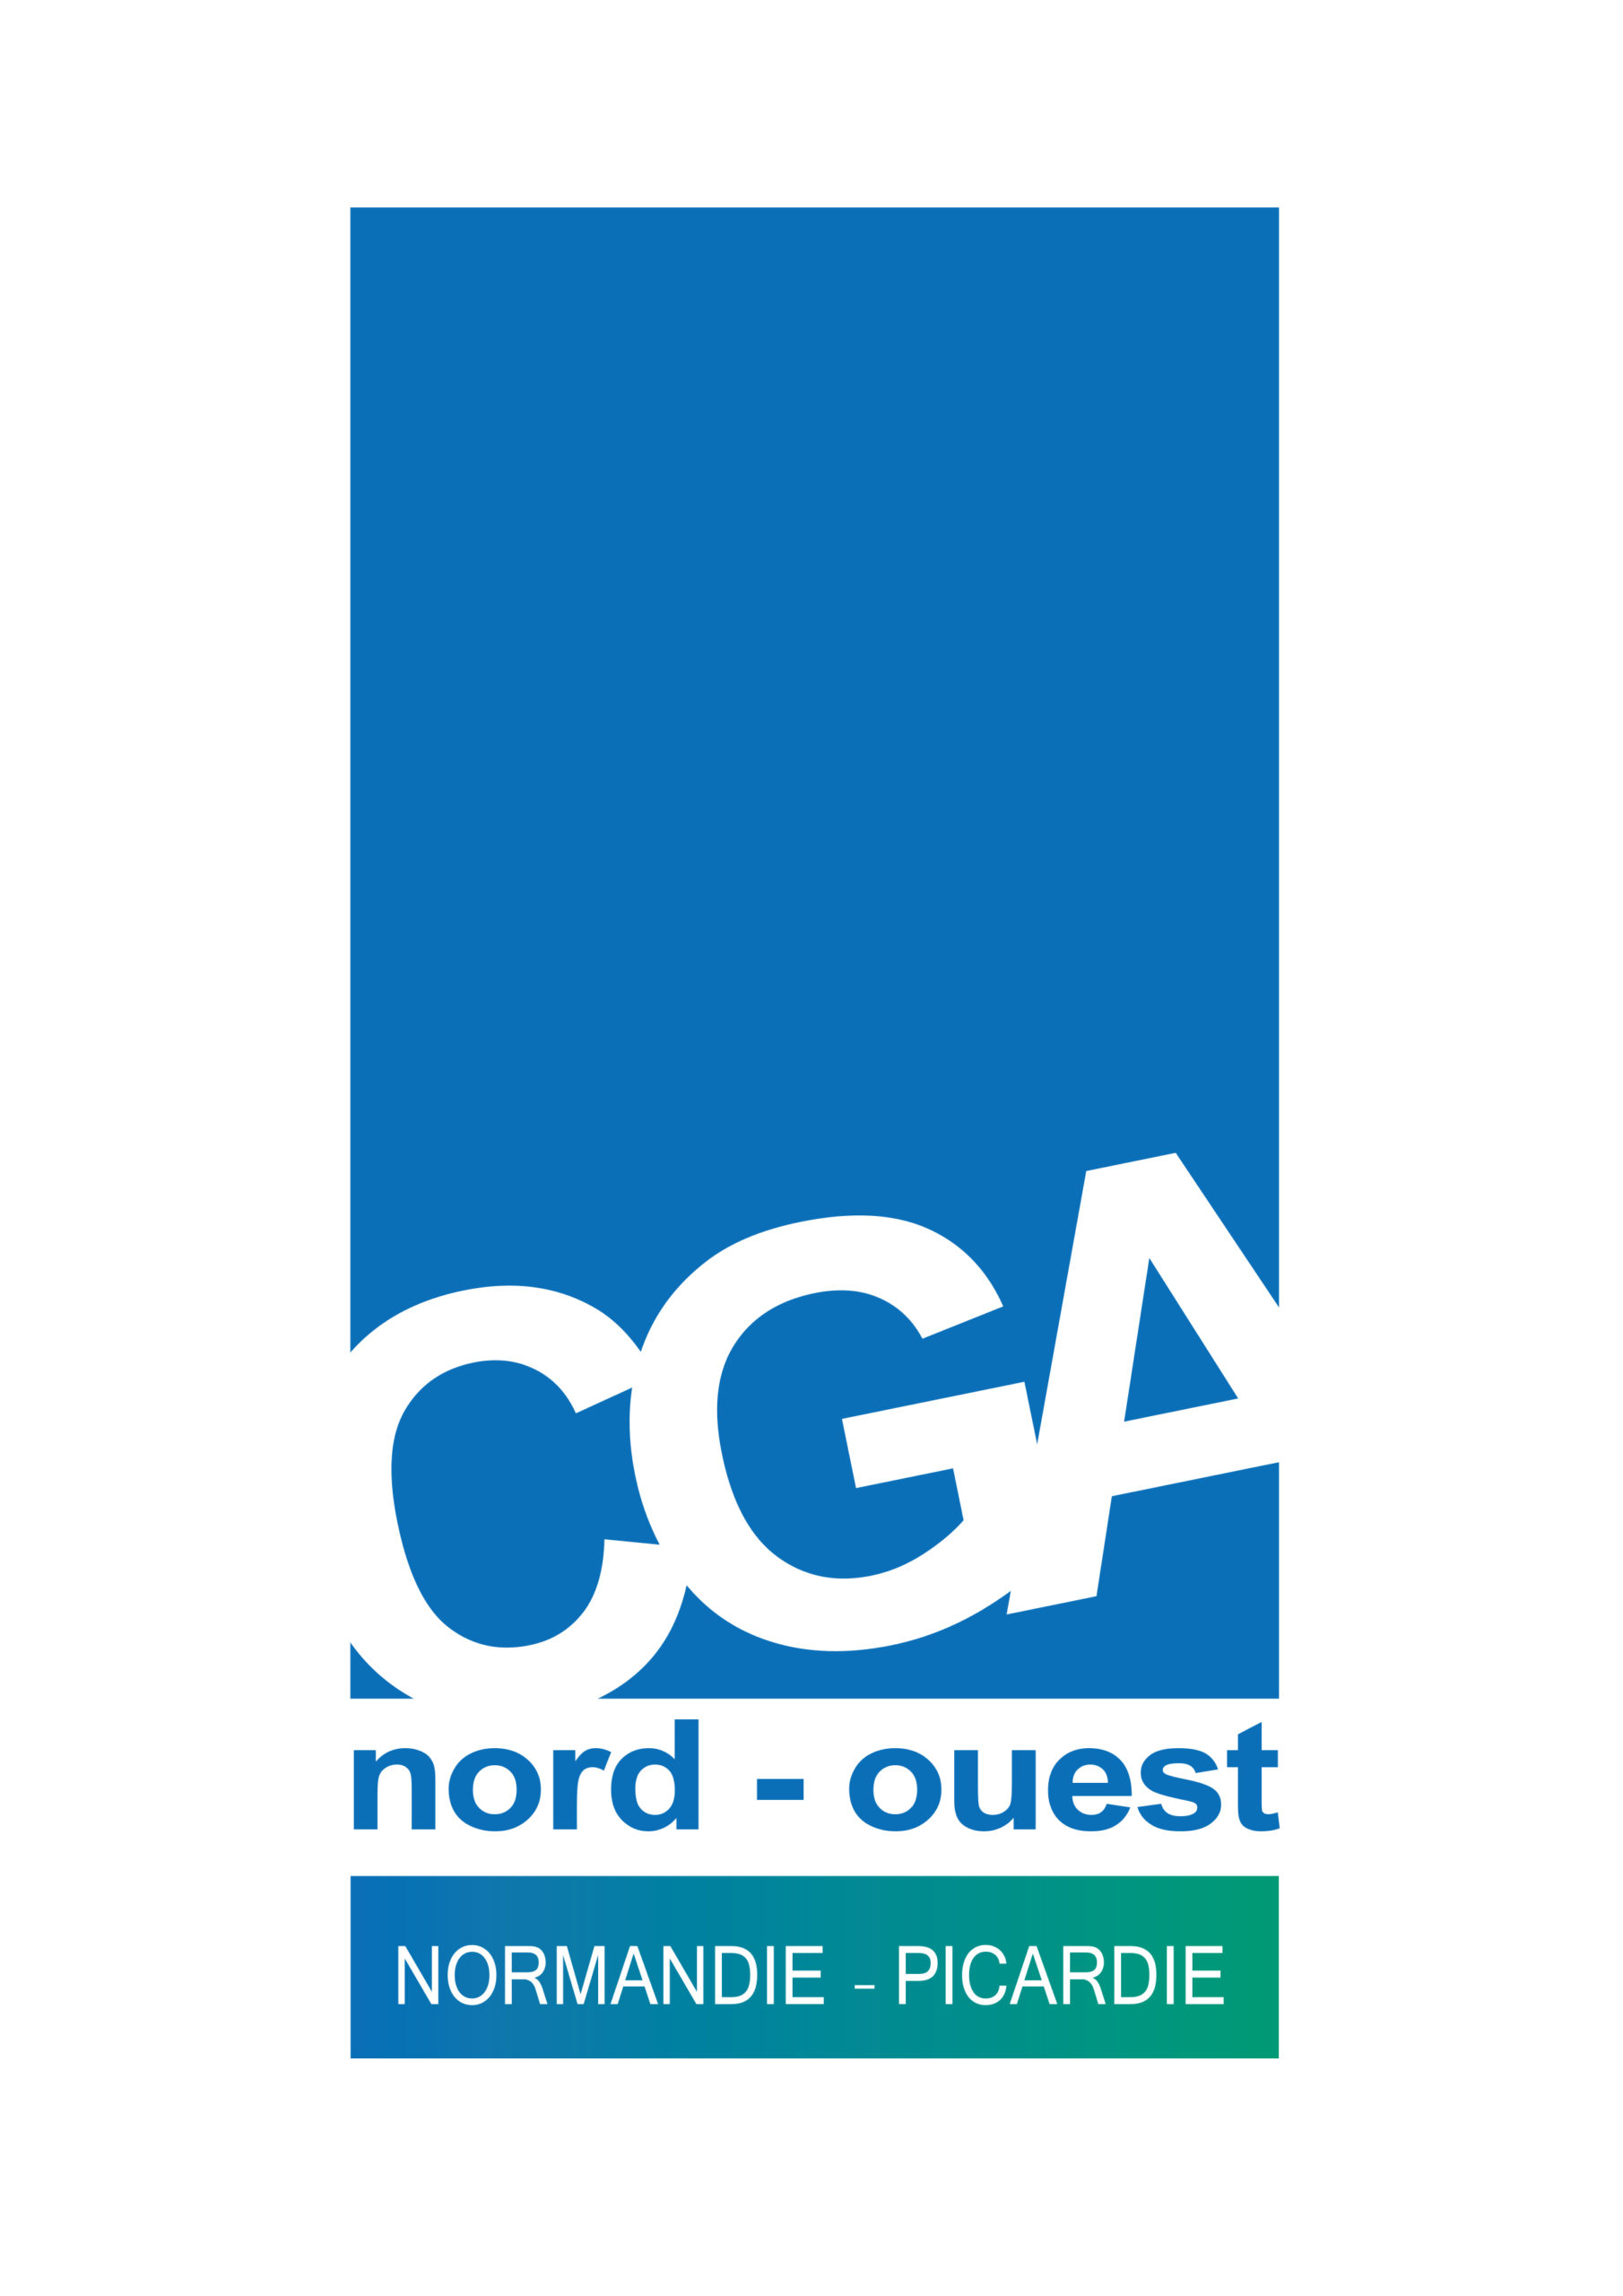 CGA Nord Ouest